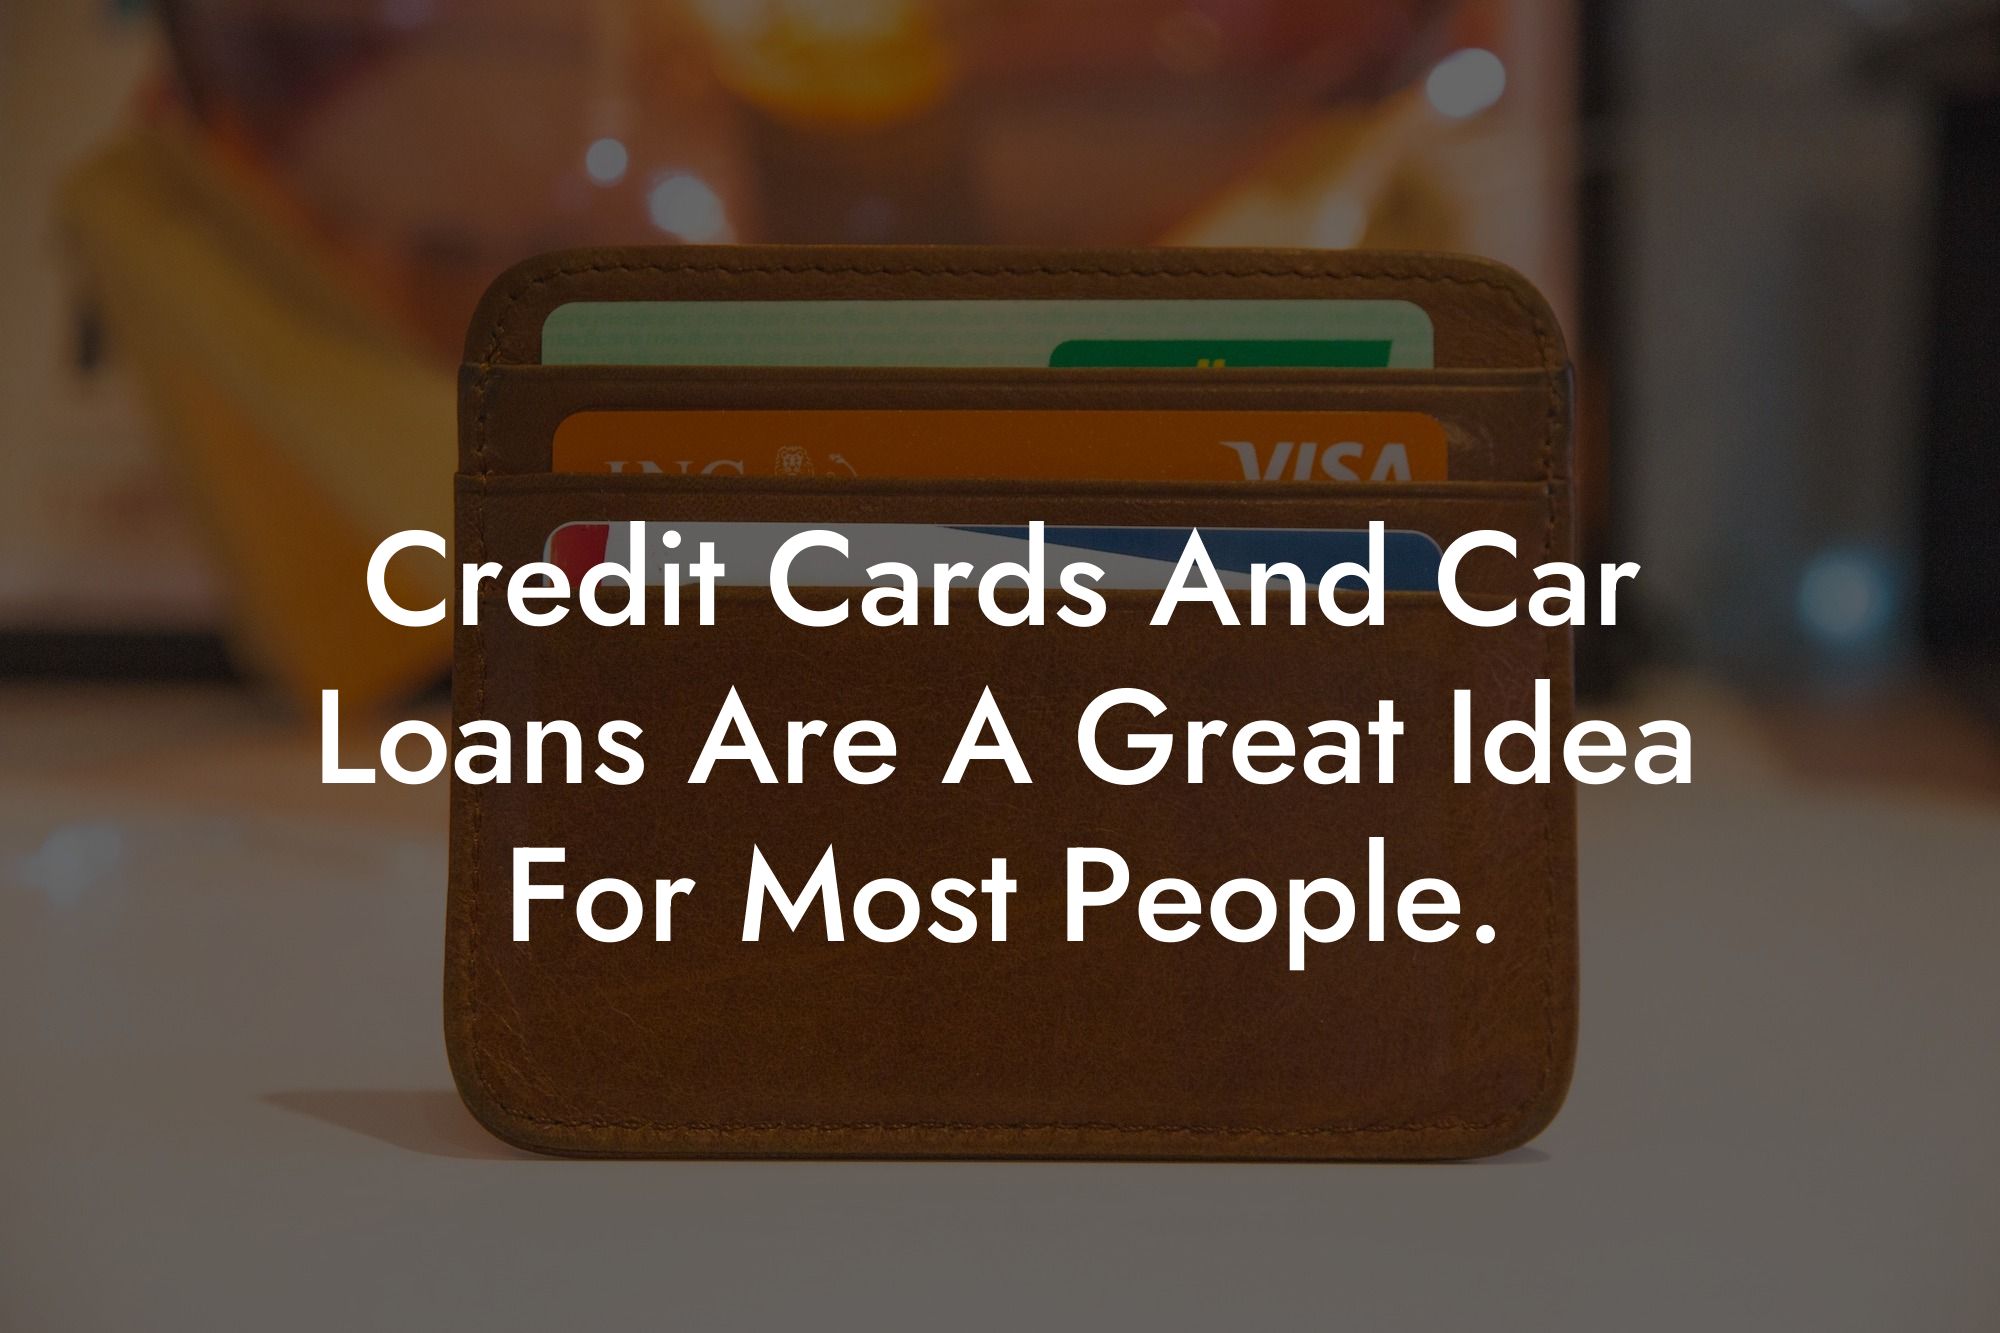 Credit Cards And Car Loans Are A Great Idea For Most People.